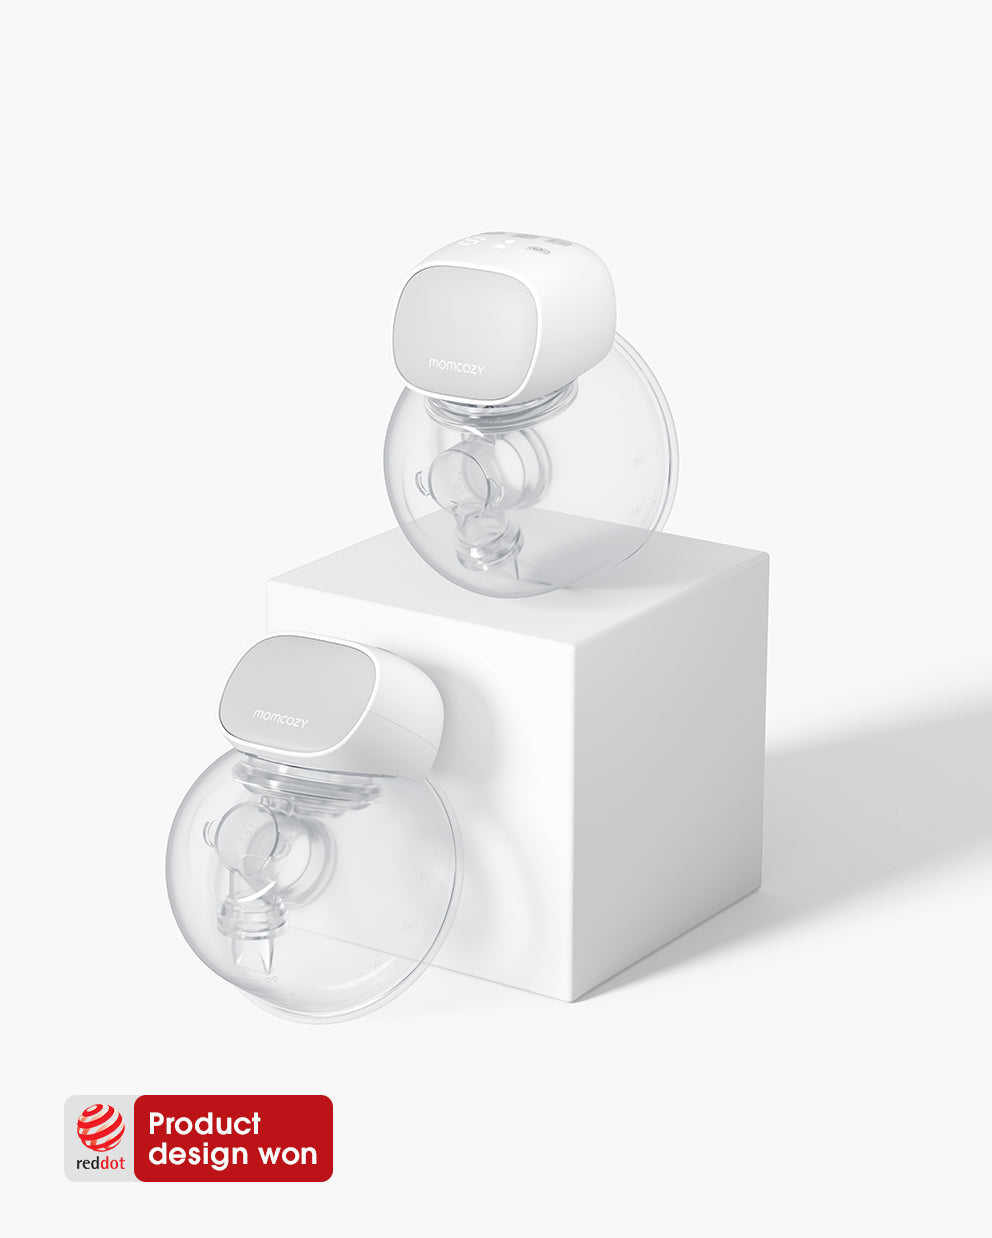 Momcozy Breast Pump Milk Collector for S9 Pro S12 Pro, Made by Momcozy, 1Pc  